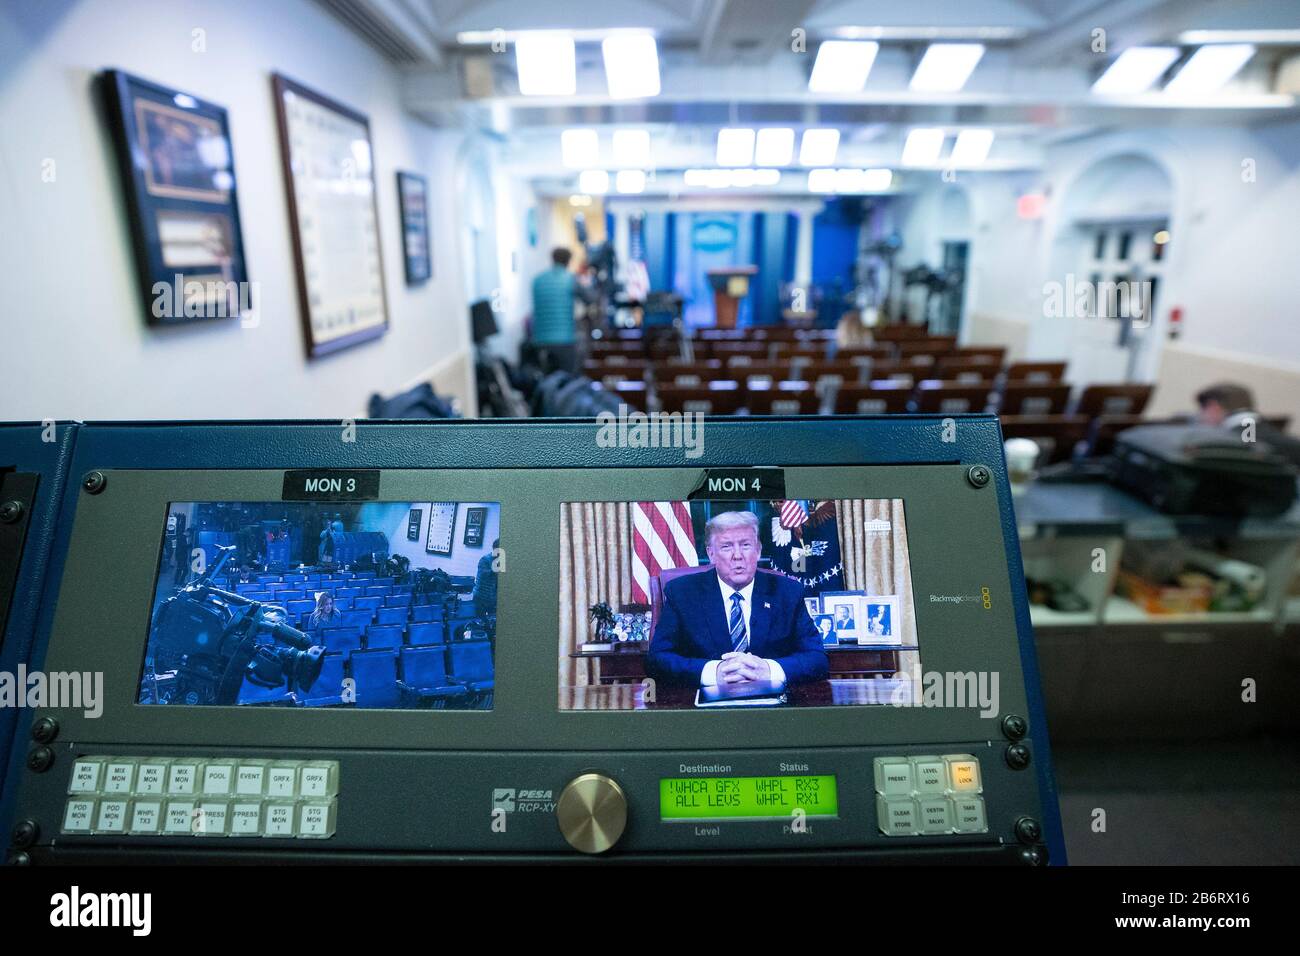 A monitor is seen in the James S. Brady Press Briefing Room of the White House in Washington, DC, U.S., on Wednesday, March 11, 2020 as United States President Donald J. Trump addresses the nation from the Oval Office. Trump announced a month long travel ban to Europe, as well as economic aid to businesses in areas affected by the Coronavirus. Credit: Stefani Reynolds/CNP /MediaPunch Stock Photo